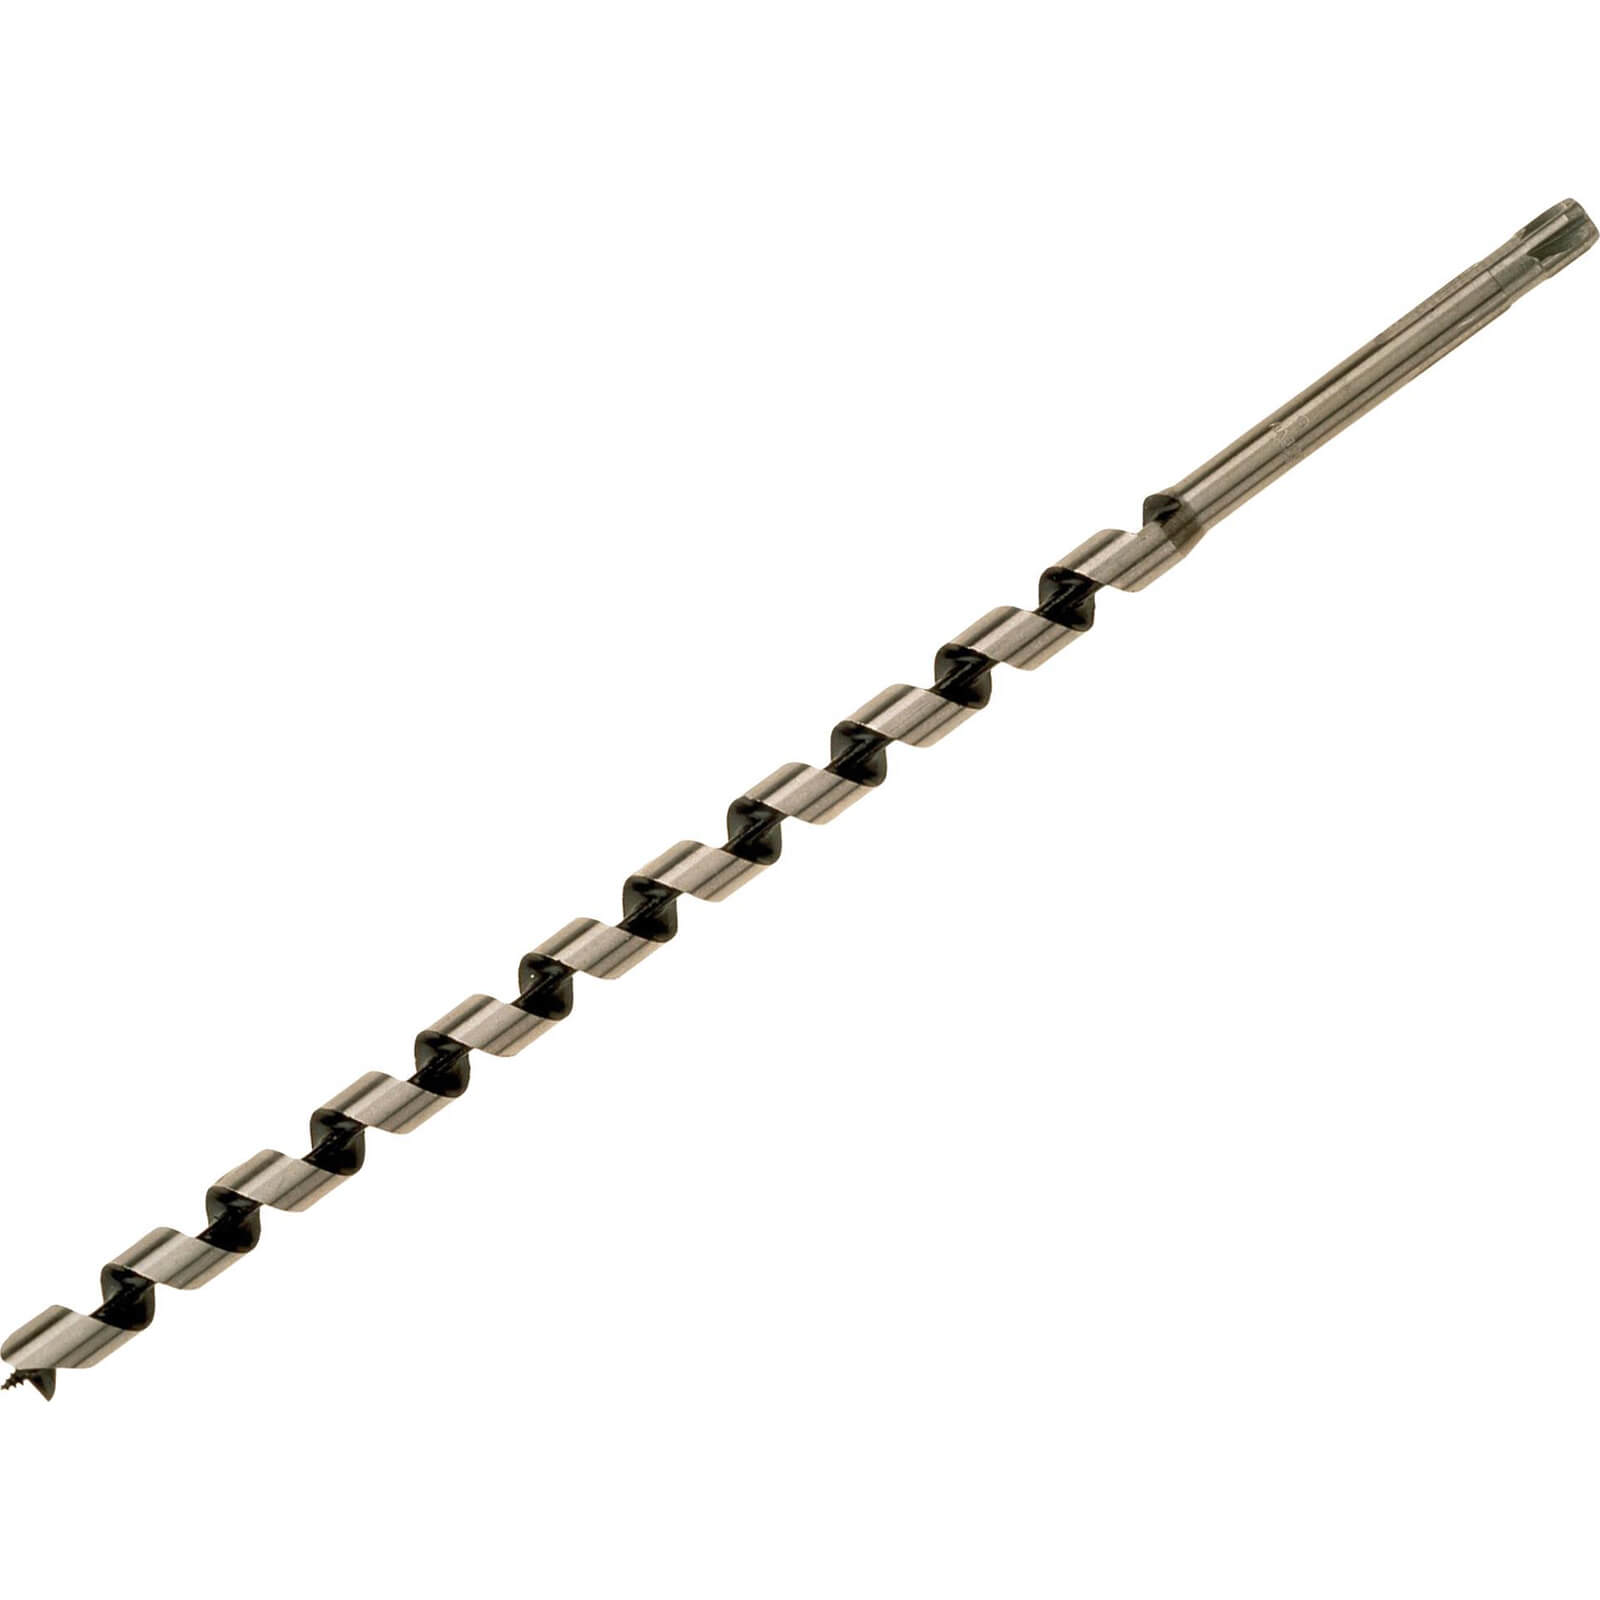 Photo of Bahco 9627 Series Long Combination Auger Drill Bit 20mm 460mm